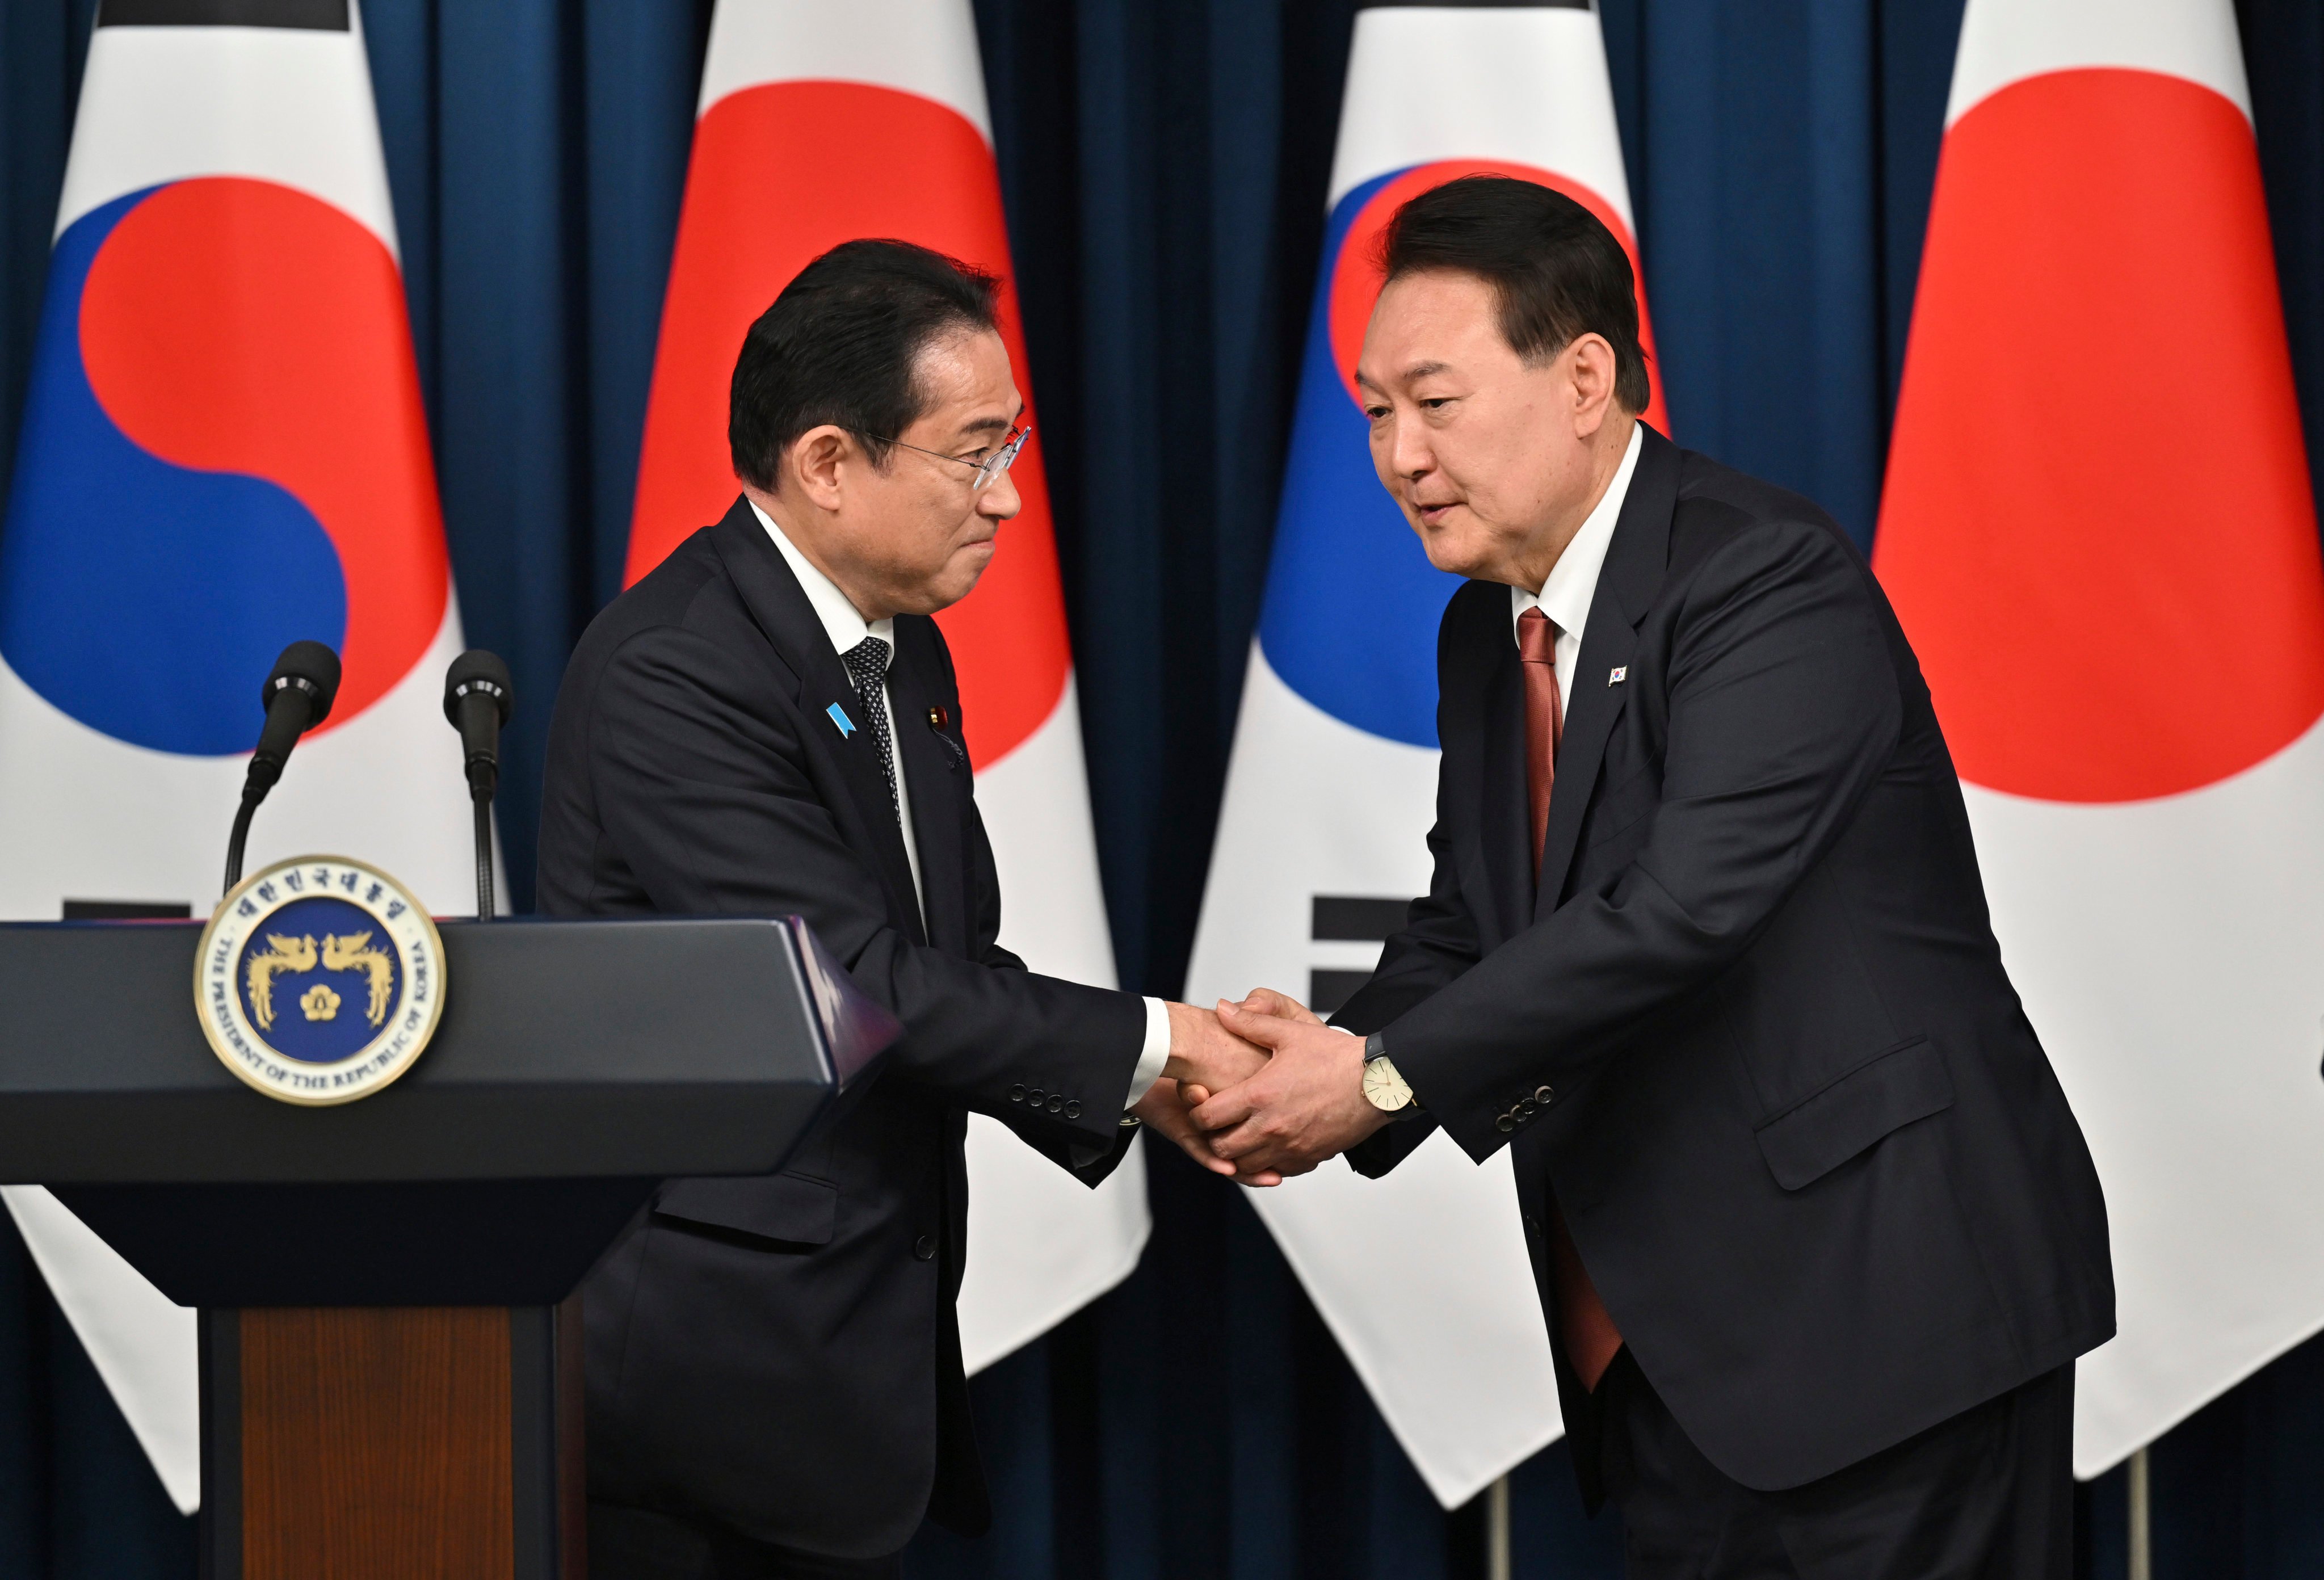 South Korean President Yoon Suk Yeol, right, shakes hands with Japanese Prime Minister Fumio Kishida during a press conference after their meeting in Seoul on Sunday, their second summit in less than two months. Photo: via AP